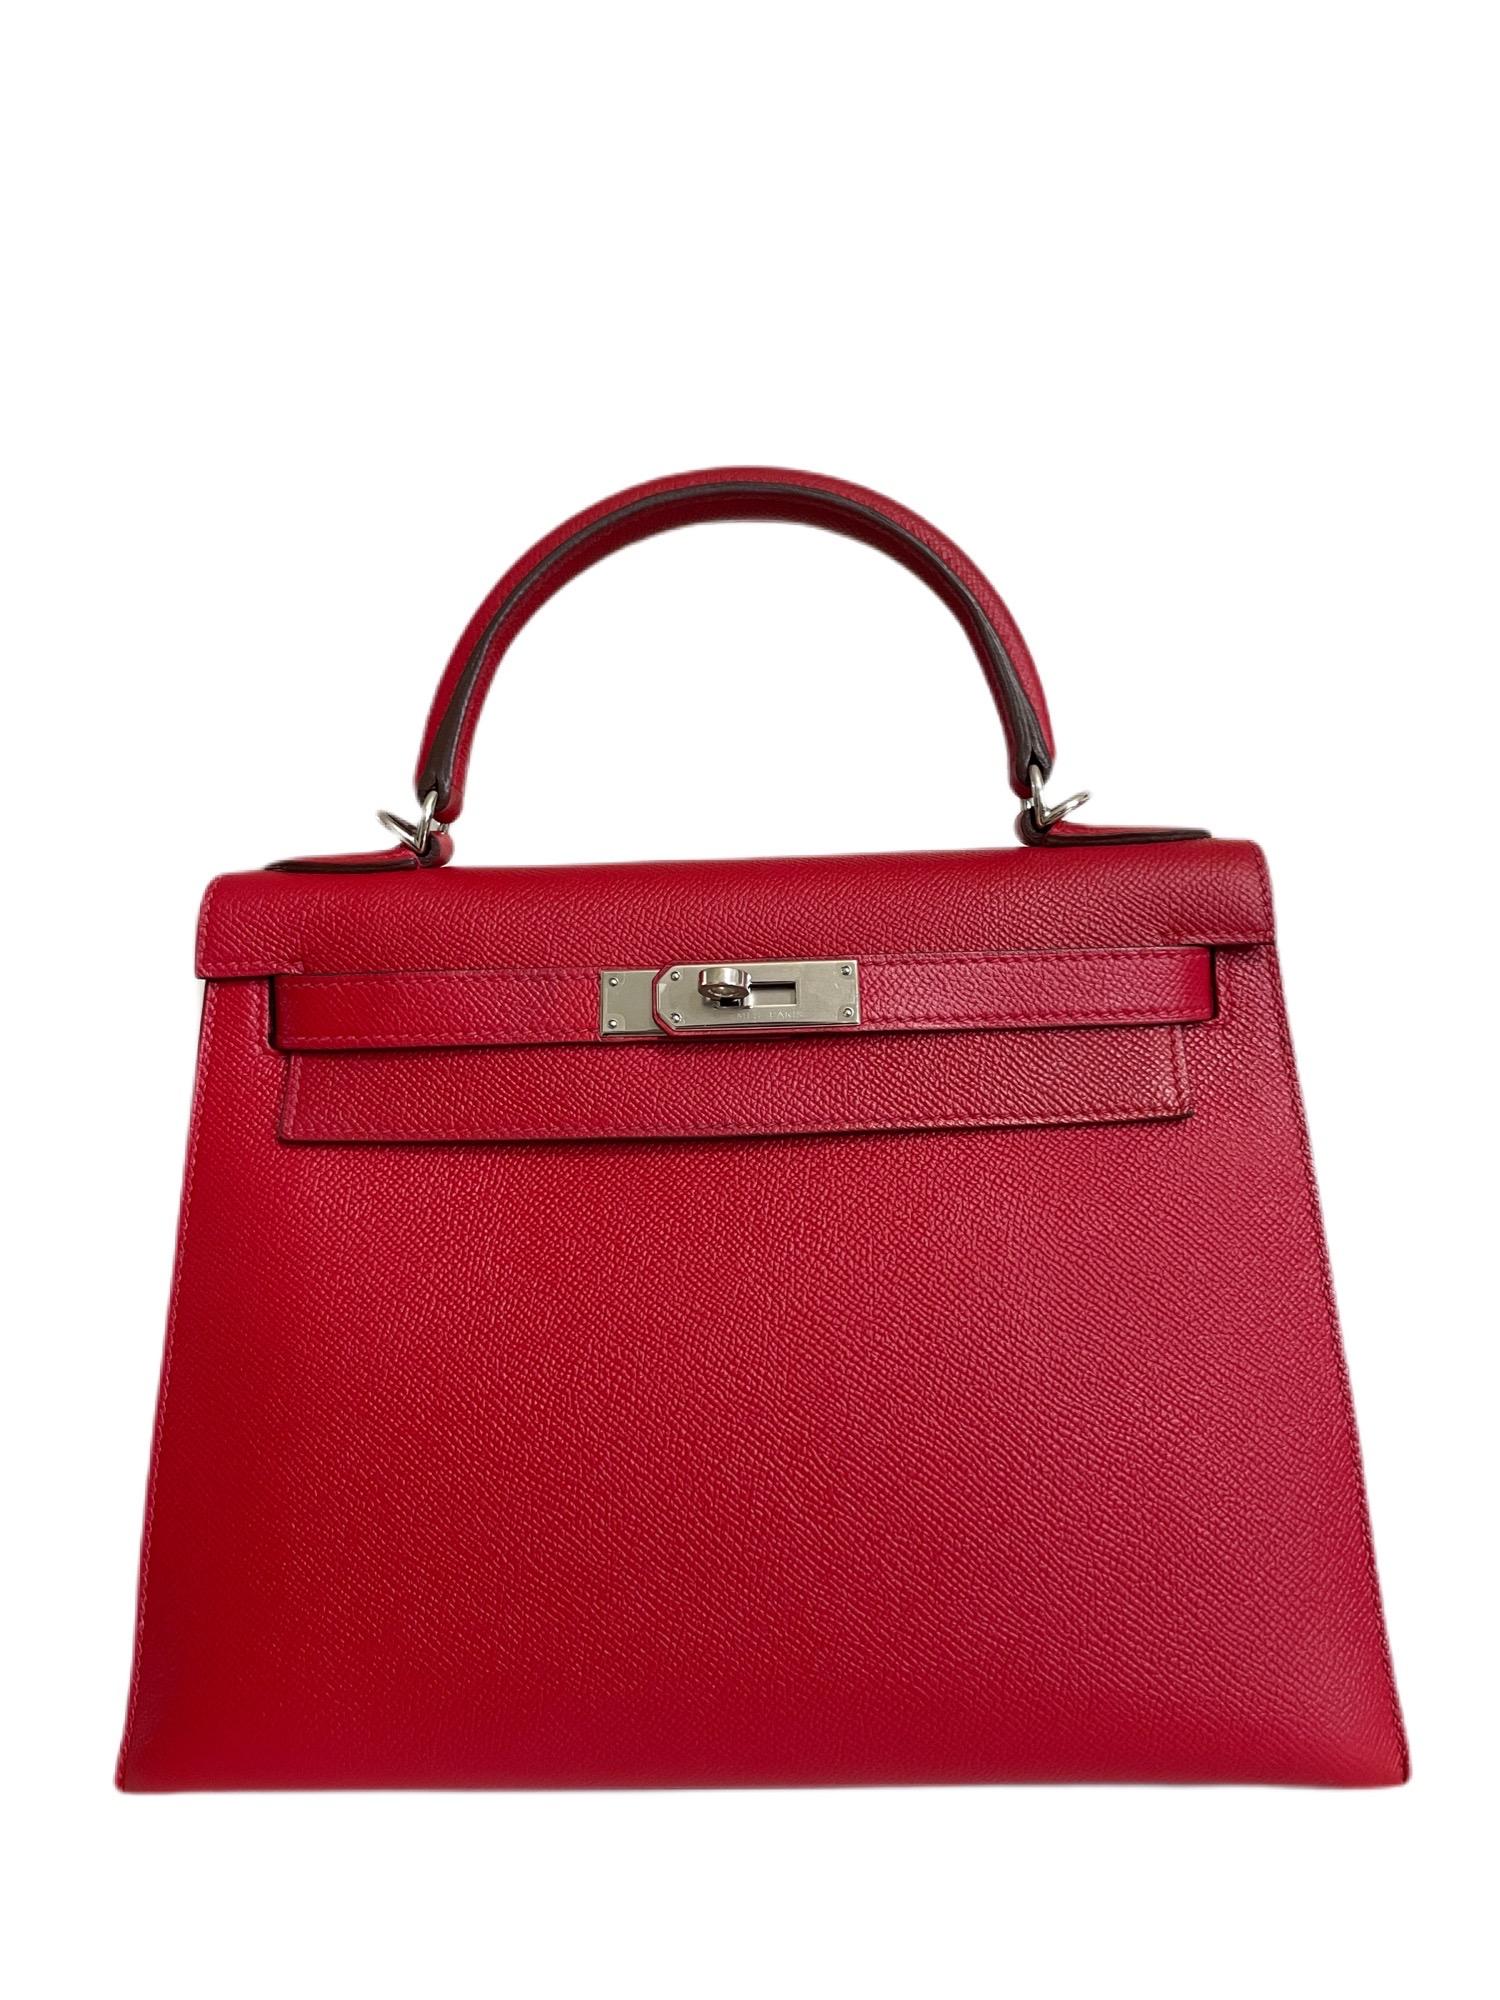 Hermes Kelly 28 Hermes Kelly 28 Rouge Casaque Red Epsom Sellier Palladium Hardware. R stamp 2014. Excellent Pristine Condition, Plastic on hardware, Excellent corners and structure. 

Shop with confidence from Lux Addicts. Authenticity guaranteed! 